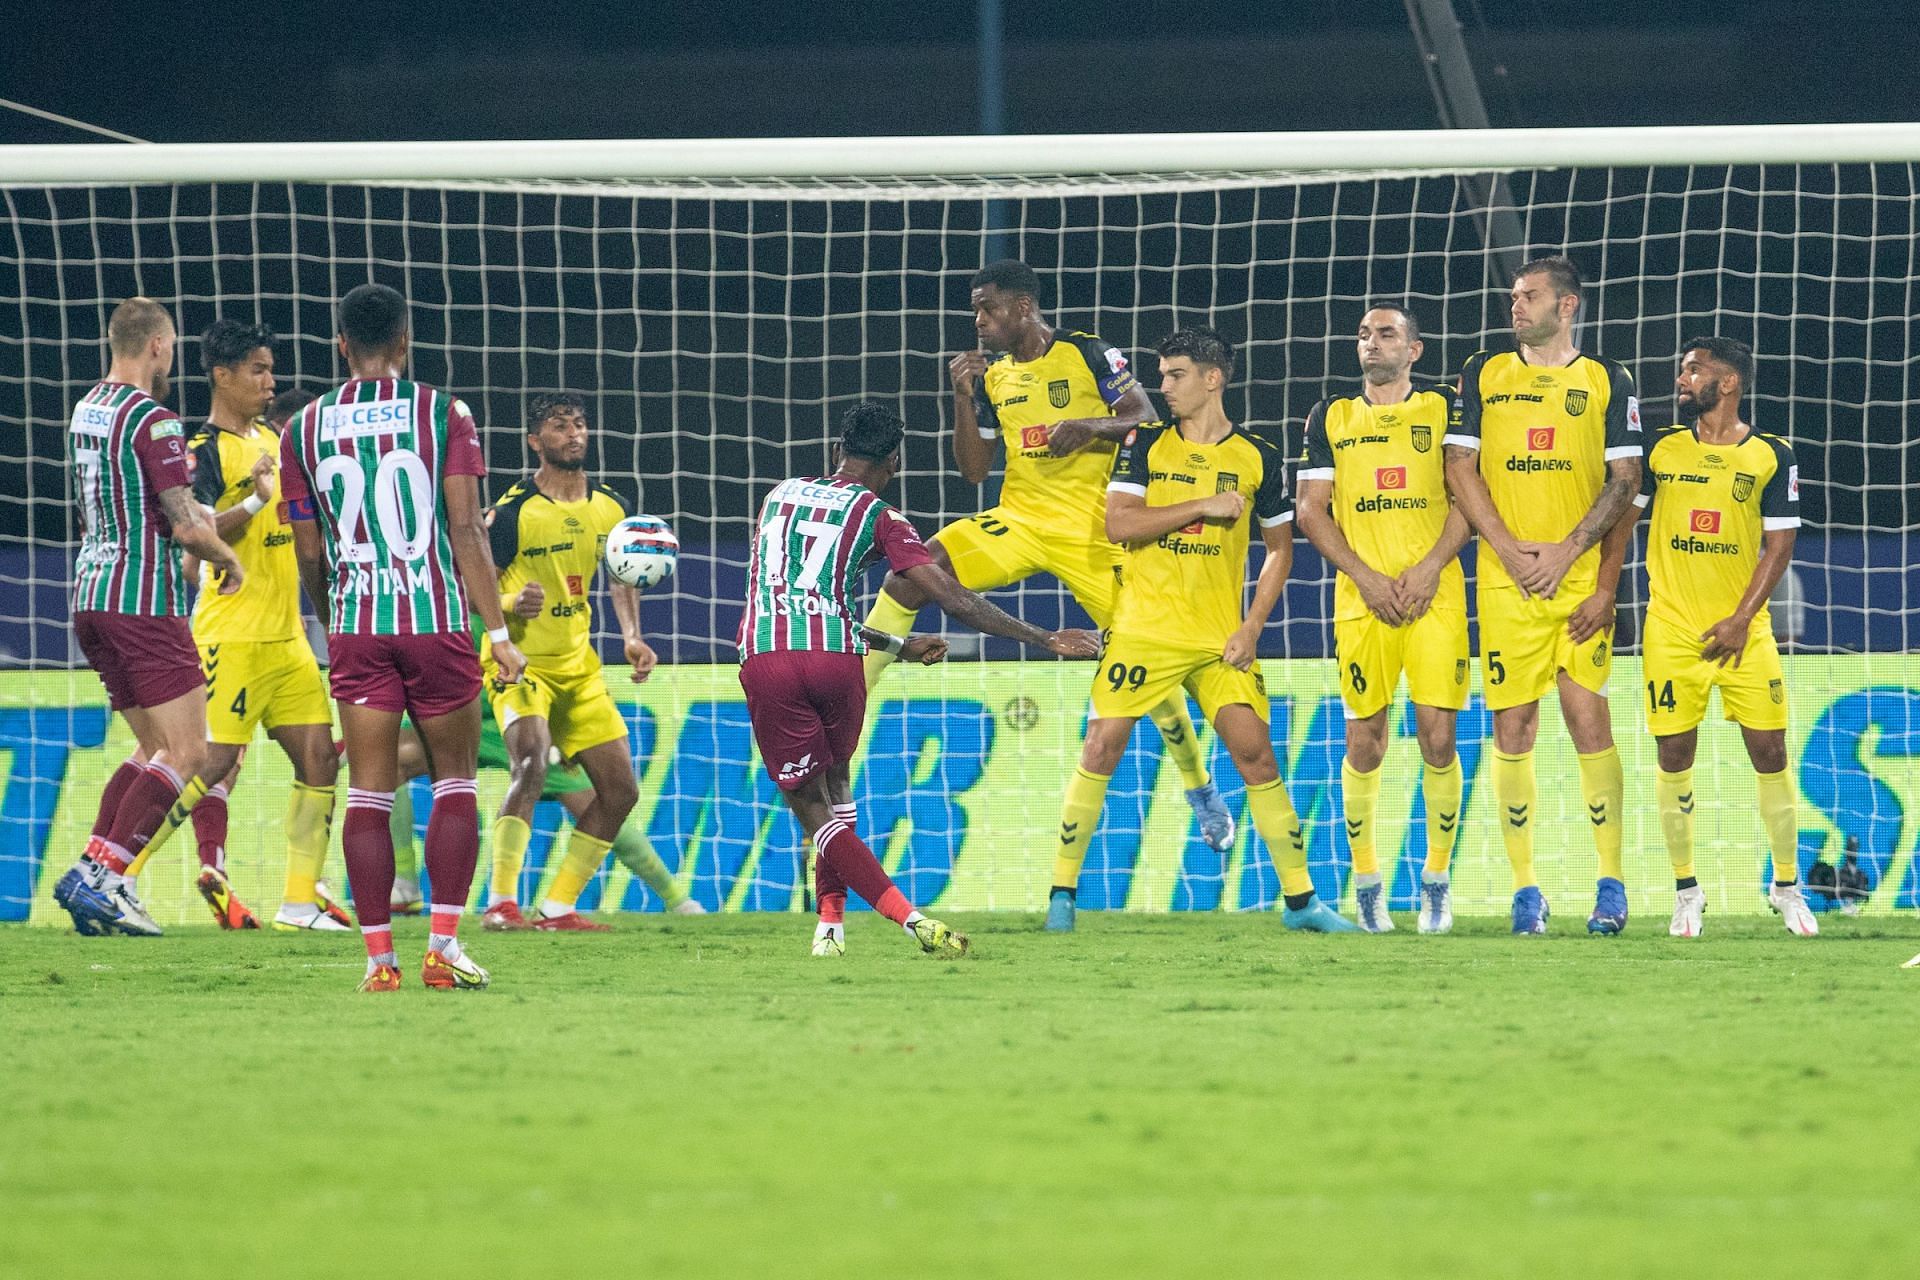 Hyderabad FC defender well to secure a spot in the finals (Image courtesy: ISL Media)